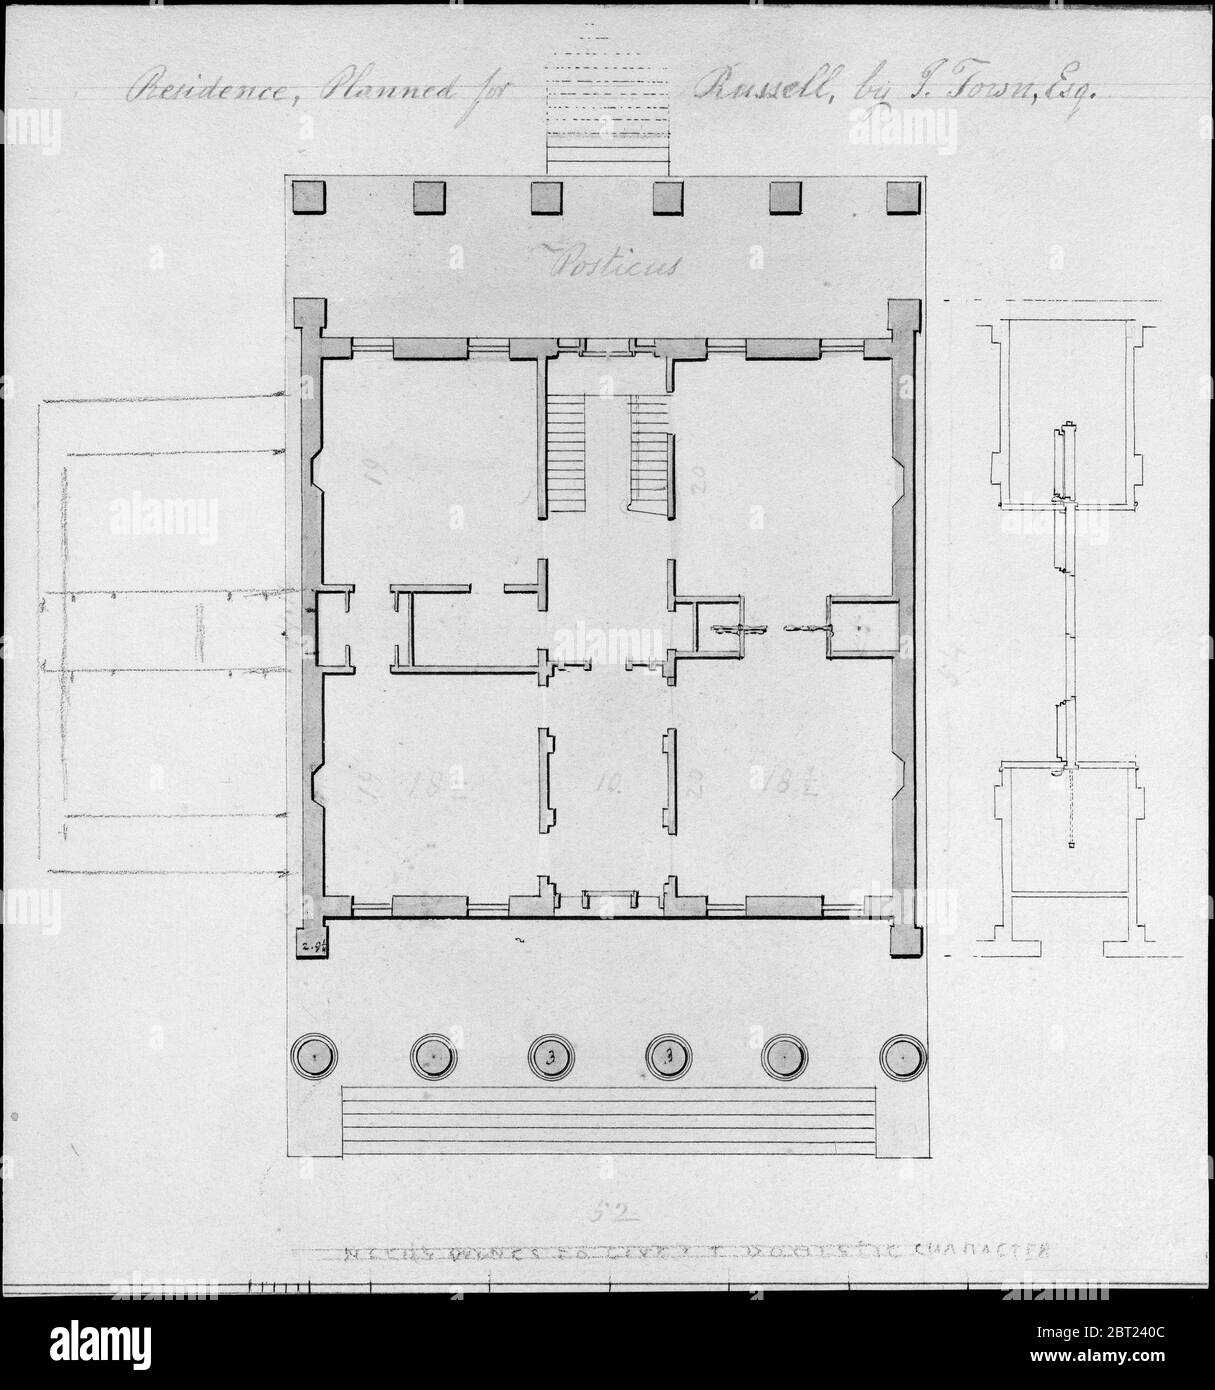 Residence, Planned for Russell, by I. Town, Esq., ca. 1828. Stock Photo